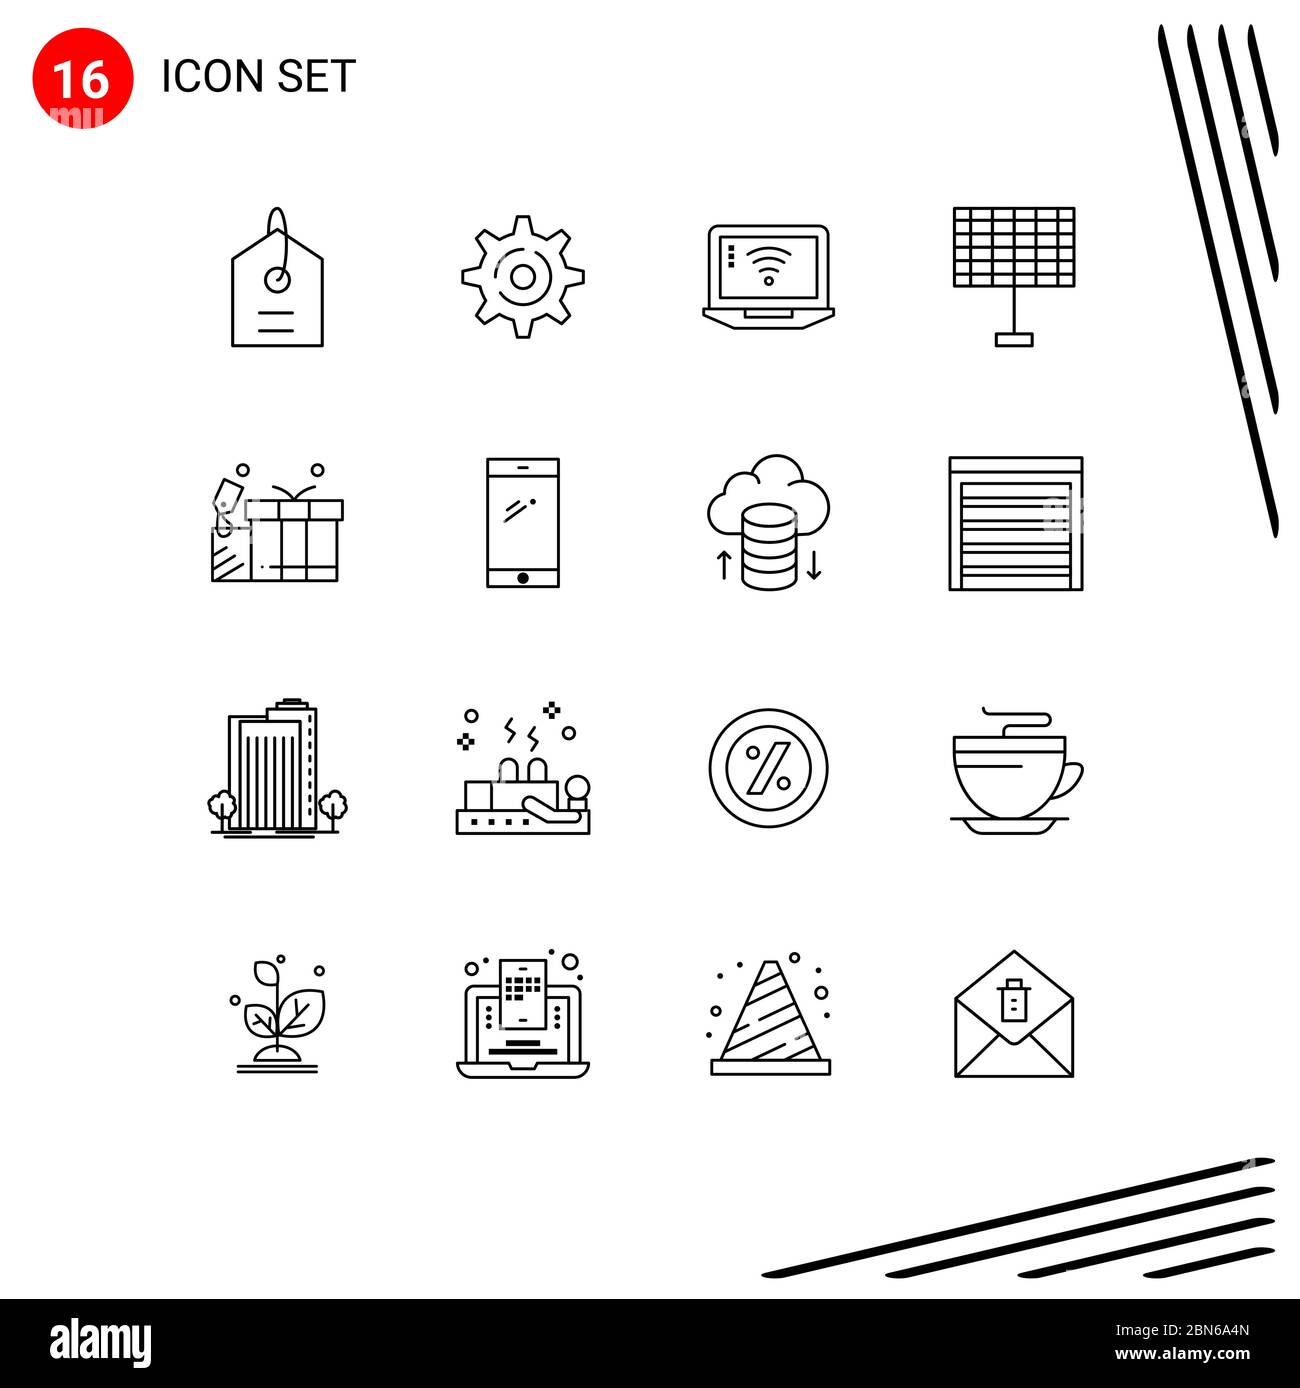 Set of 16 Vector Outlines on Grid for phone, love, signal, tag, solar Editable Vector Design Elements Stock Vector